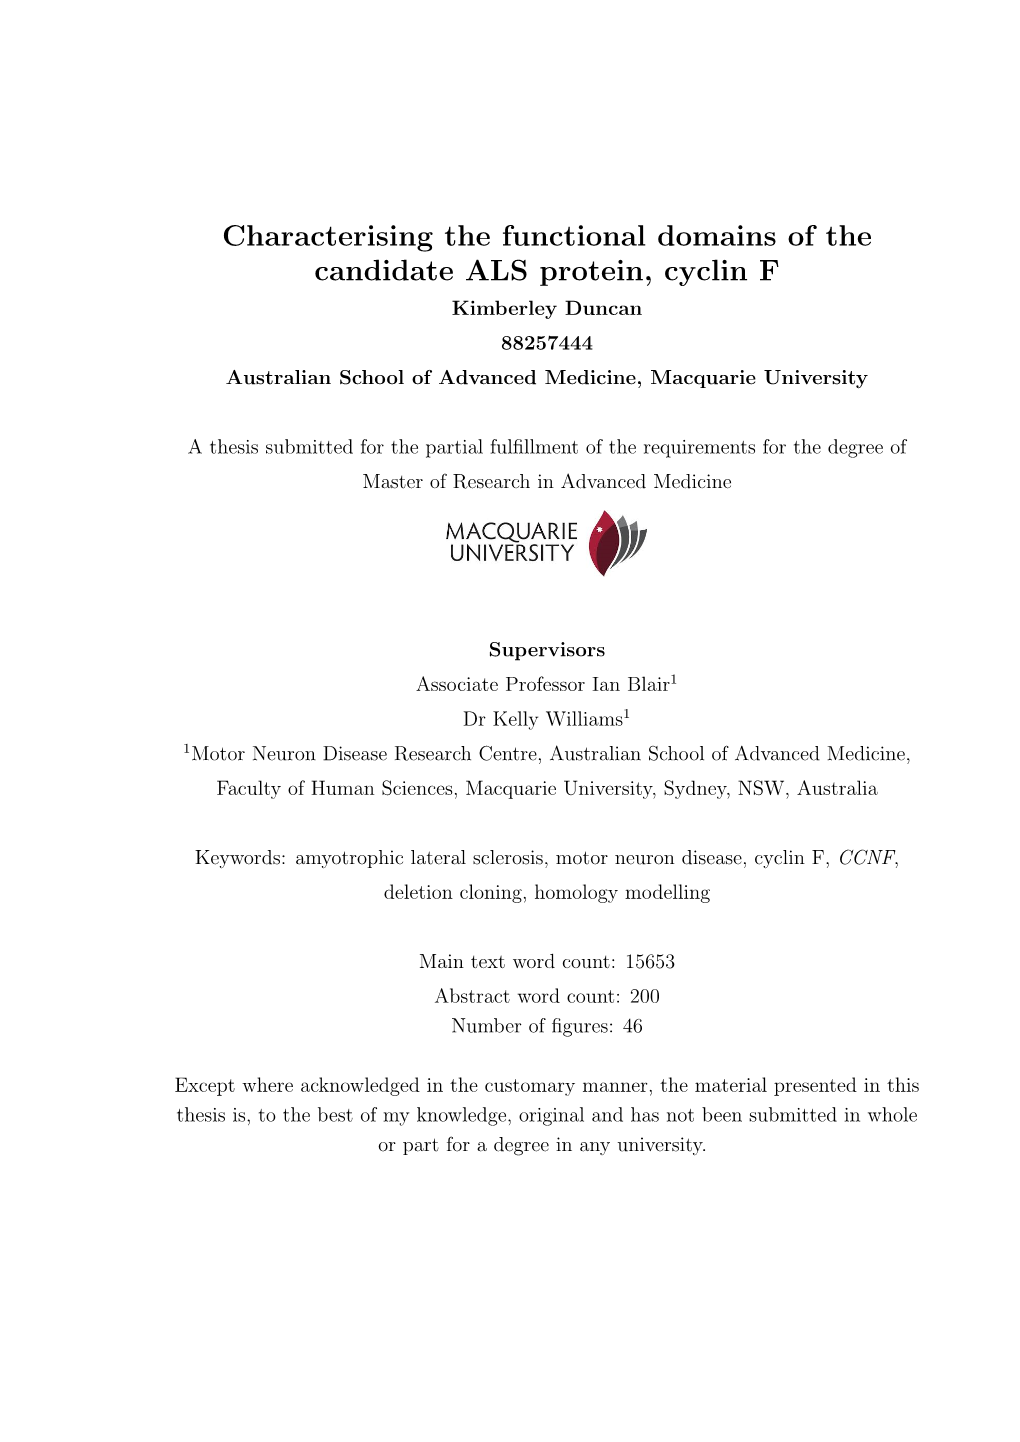 Characterising the Functional Domains of the Candidate ALS Protein, Cyclin F Kimberley Duncan 88257444 Australian School of Advanced Medicine, Macquarie University